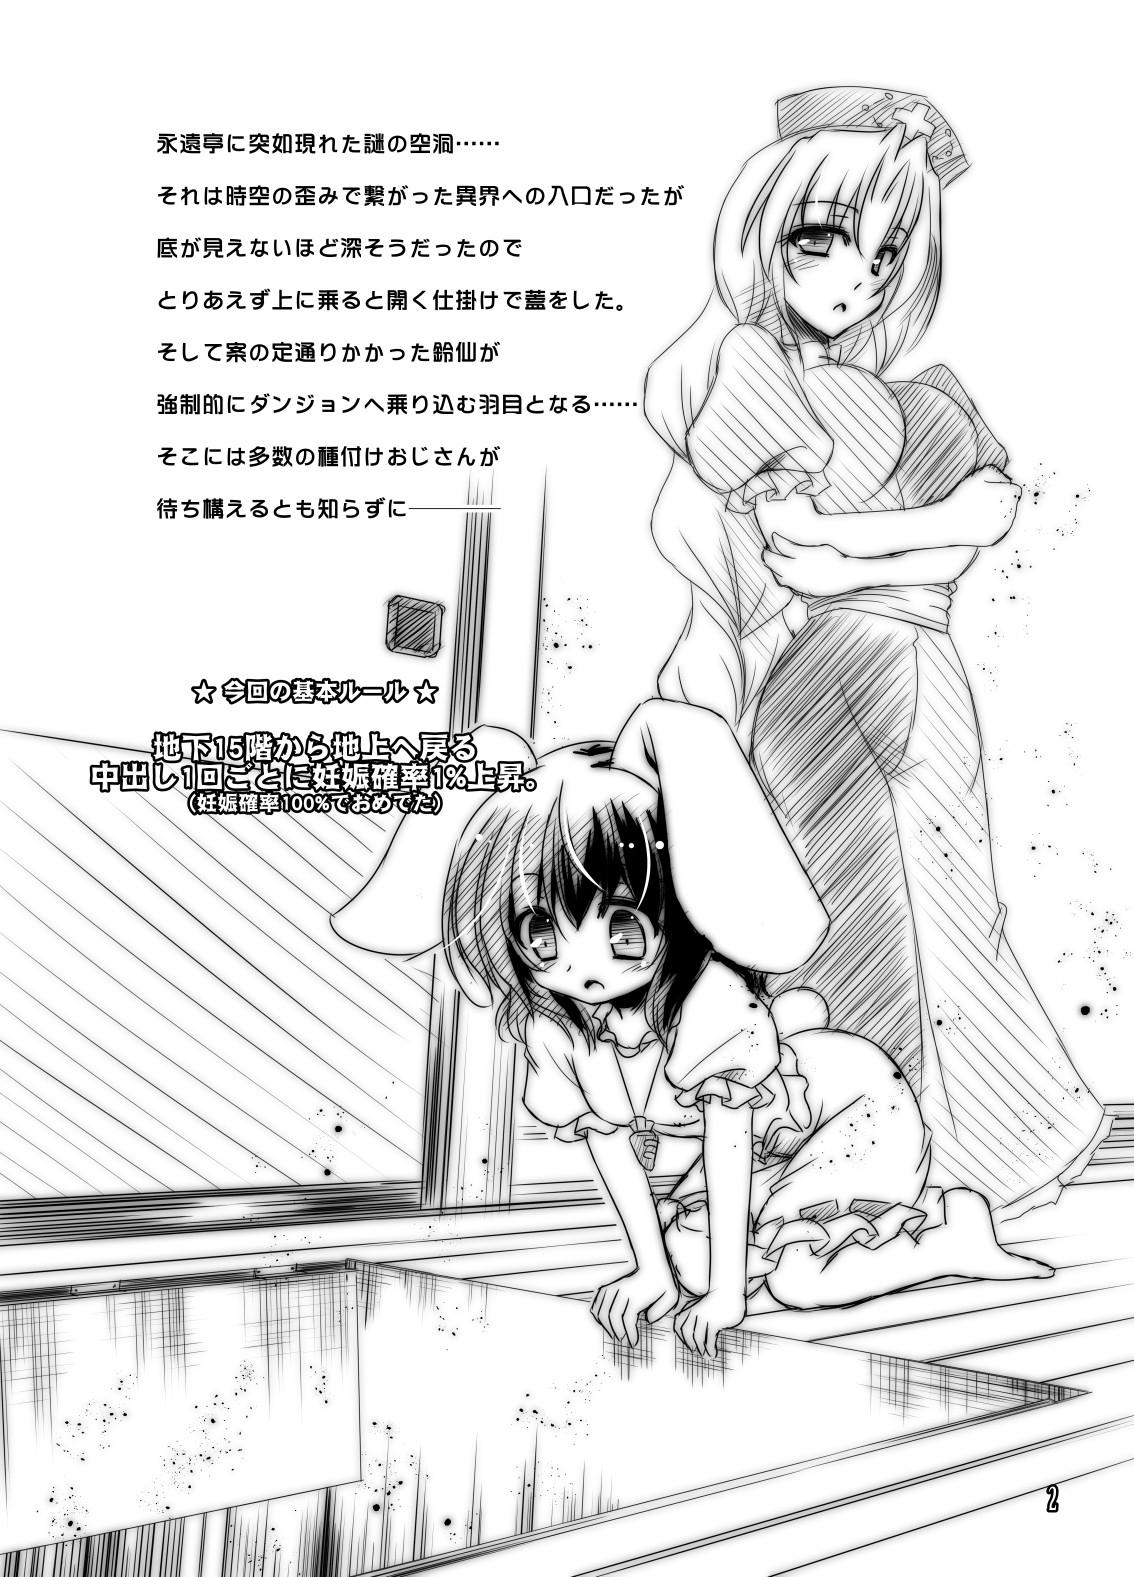 Por Udonge vs Tanetsuke Oji-san Dungeon - Touhou project Speculum - Page 2